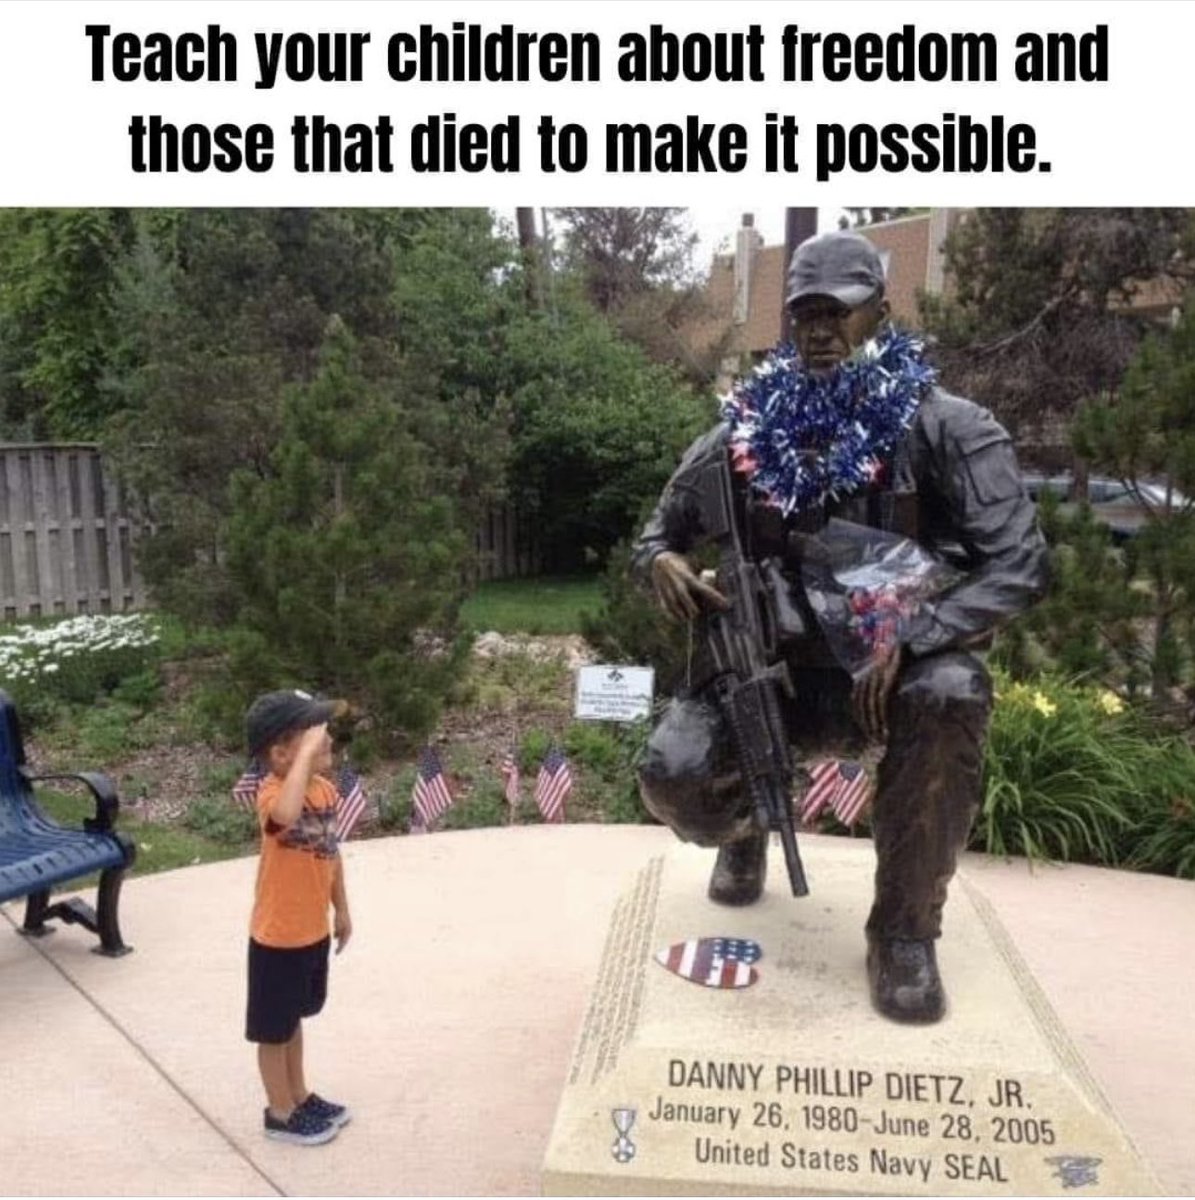 This is so important! Patriotism 🇺🇸is being lost in schools! We owe these military 🇺🇸heroes everything! We live in the greatest country in the world because of them and their sacrifice! 🙌🏻❤️🇺🇸 #FreedomIsNotFree